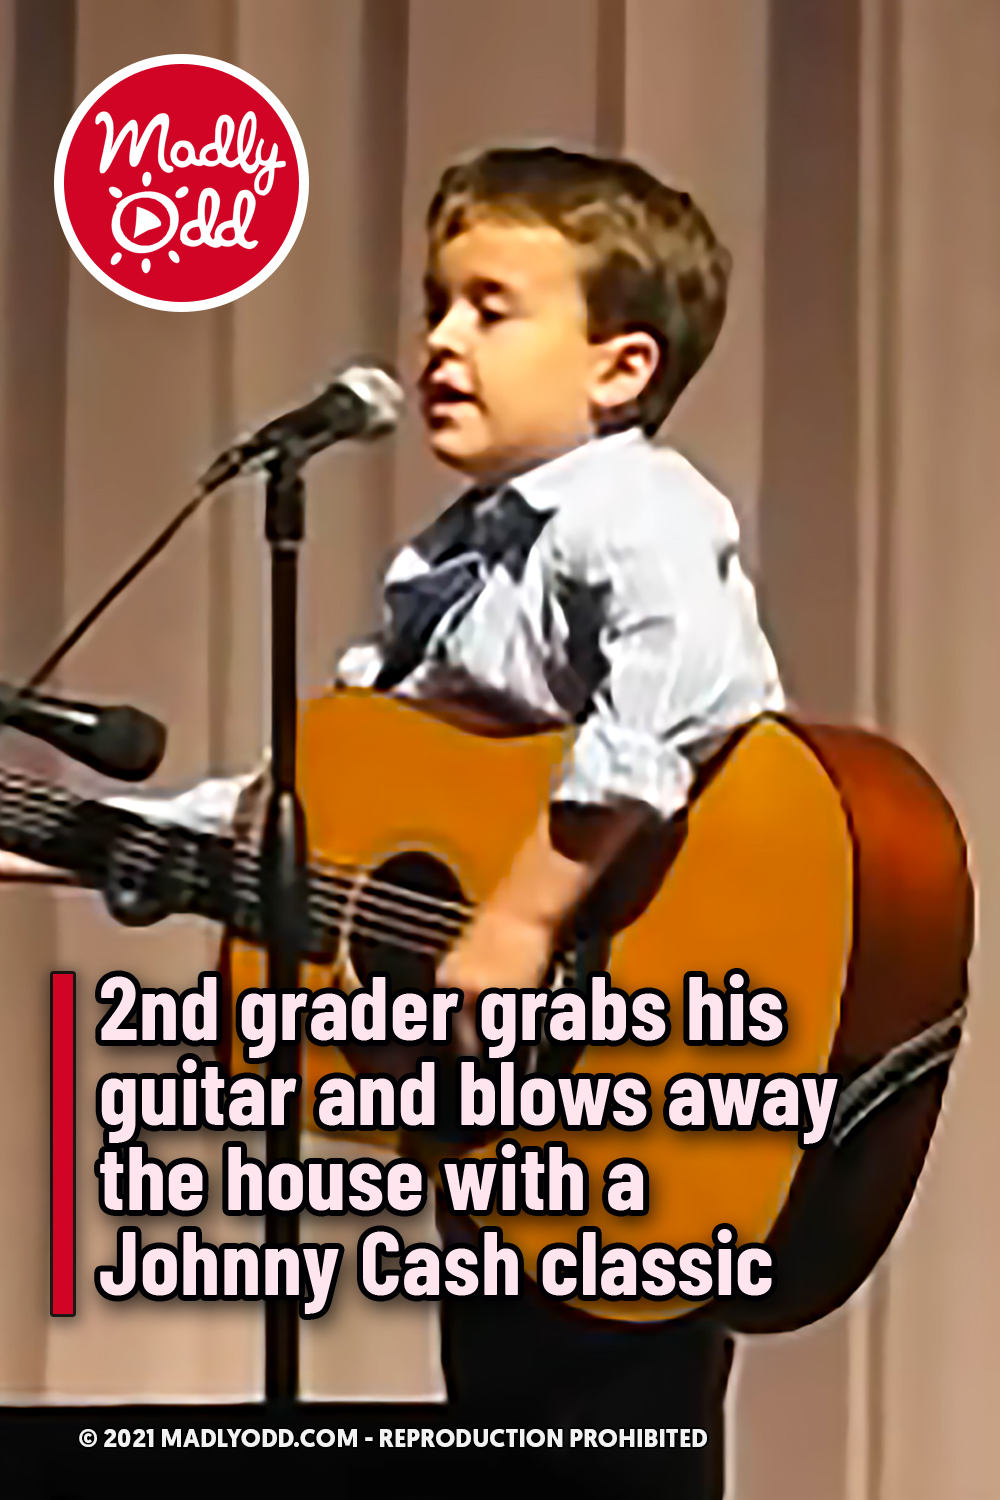 2nd grader grabs his guitar and blows away the house with a Johnny Cash classic